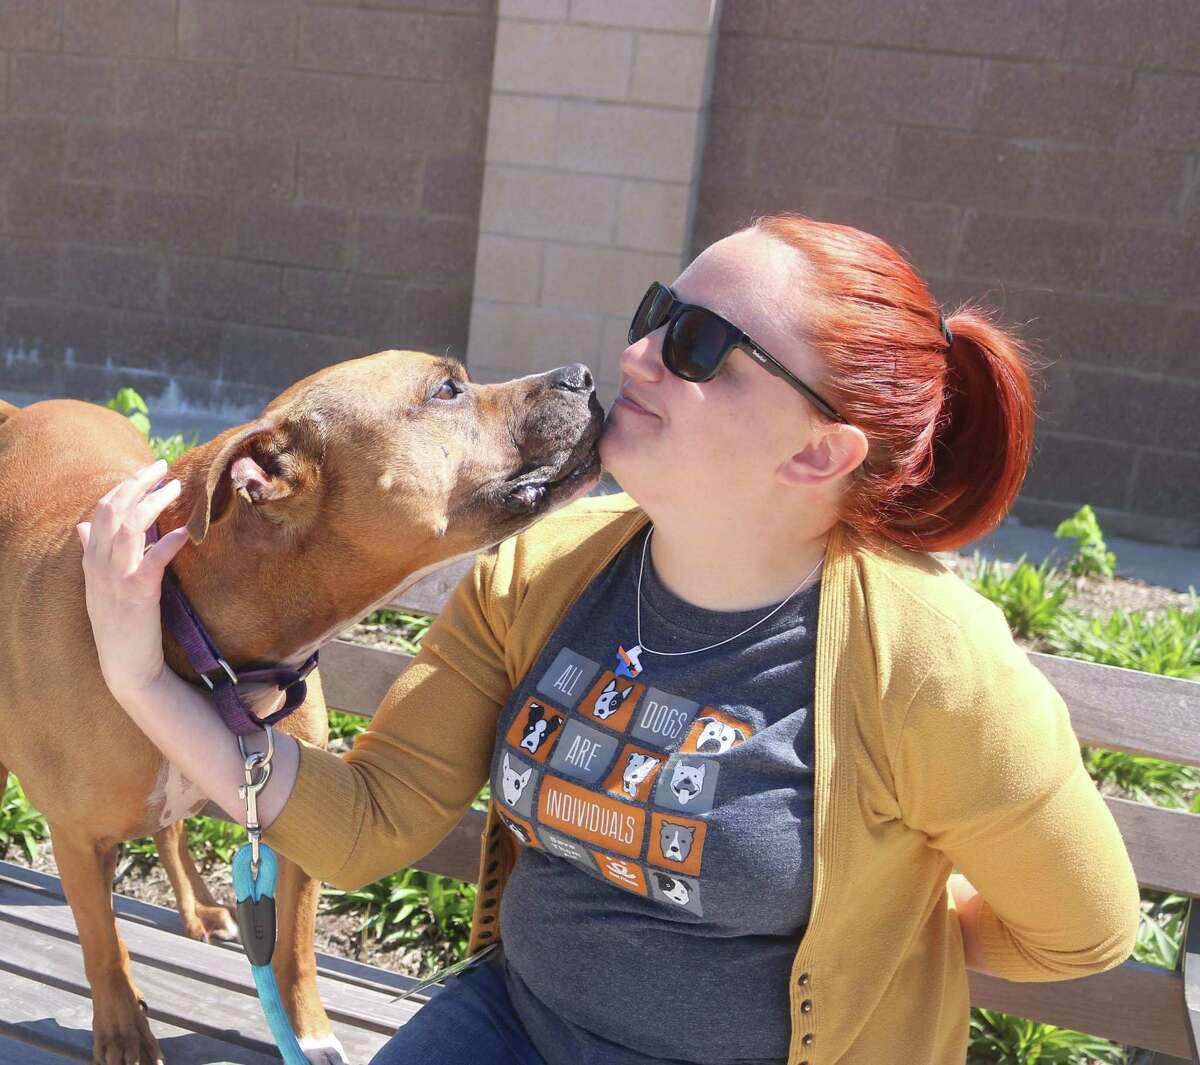 League City Animal Control coordinator Lynette Bodmer receives a kiss from Brock in the facility's courtyard. Brock is one of the dogs waiting to be adopted.